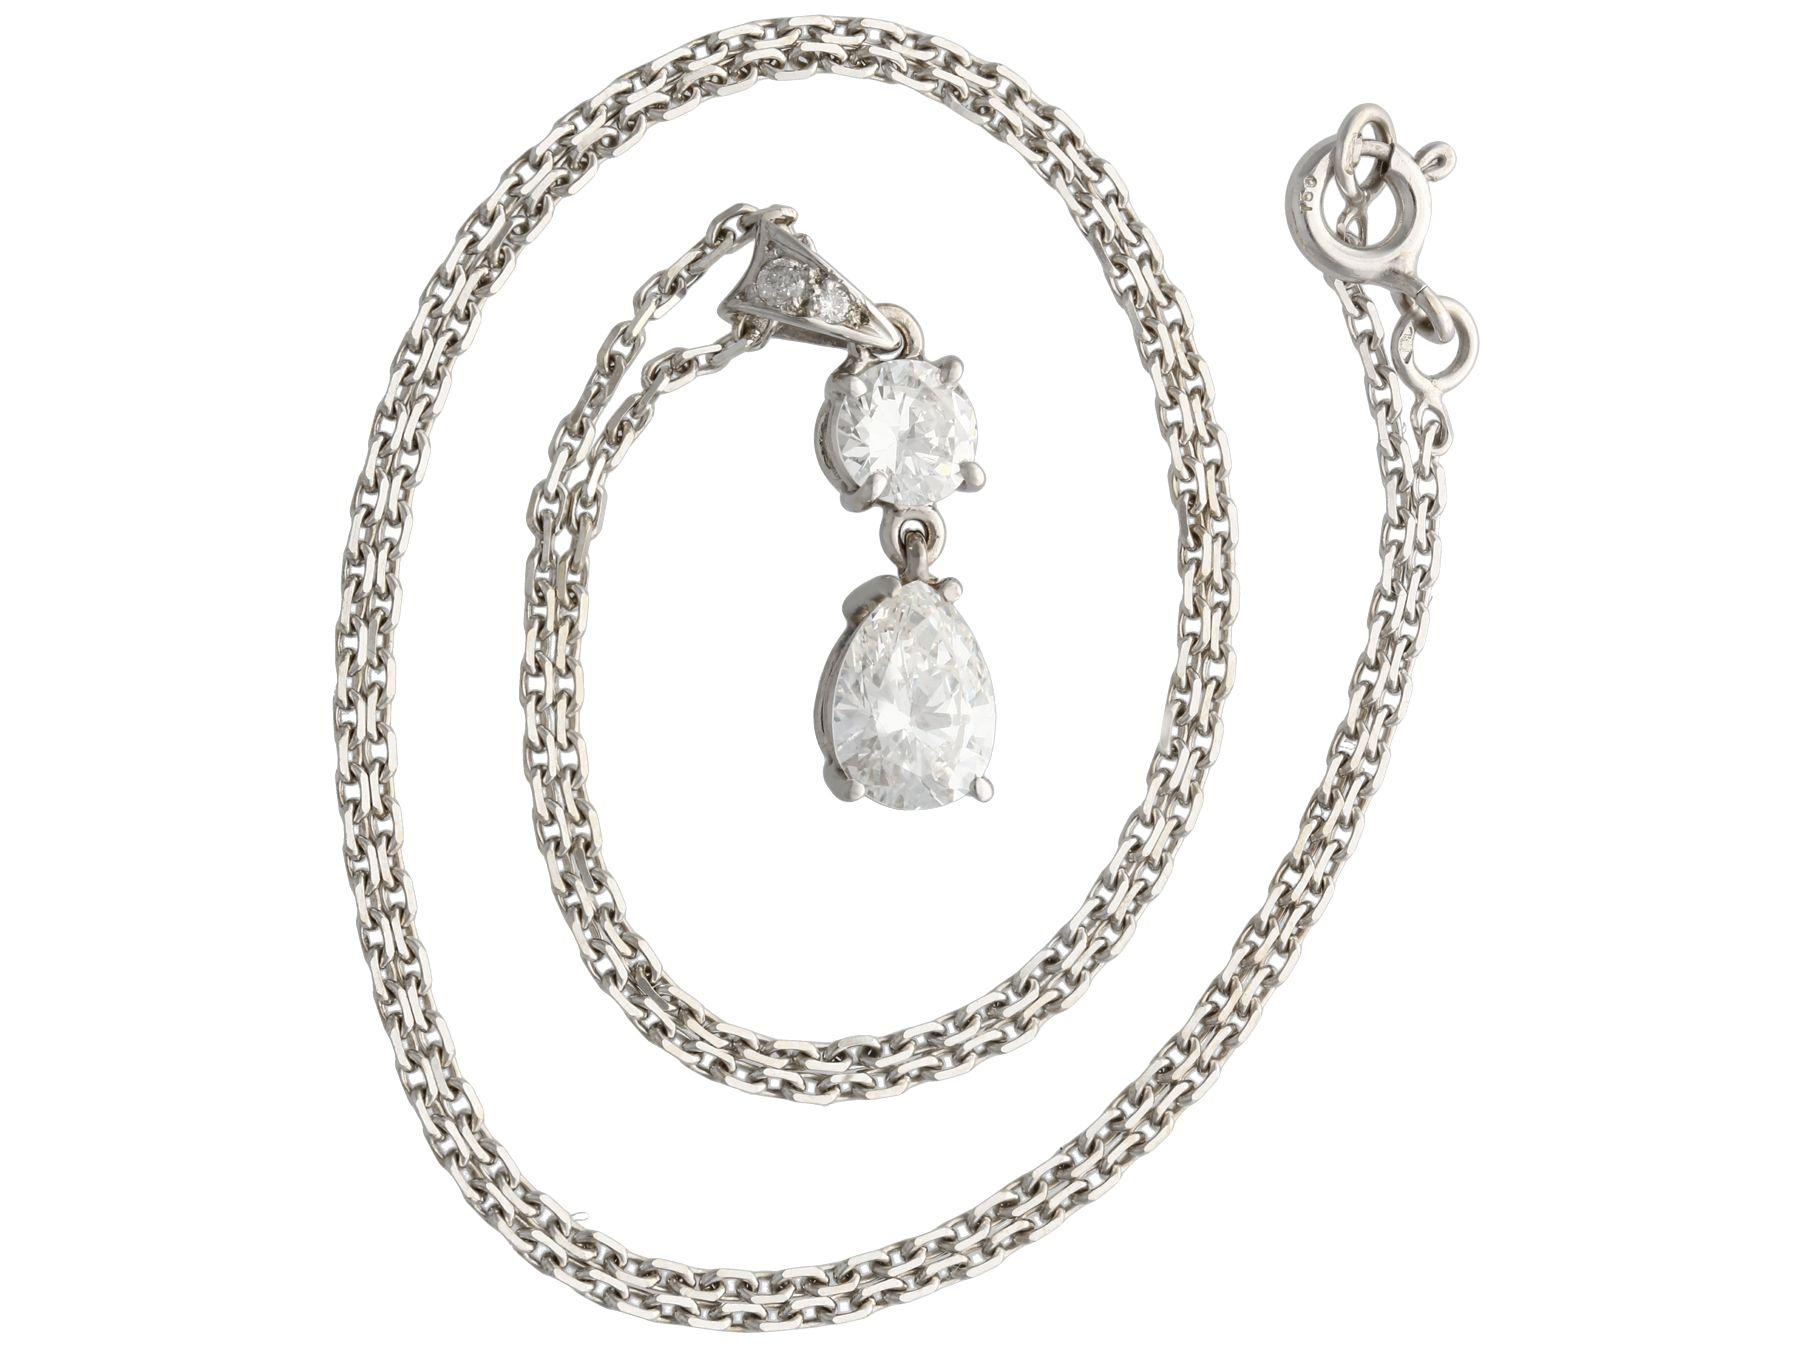 A stunning vintage French 1.55 Ct diamond and 18k white gold pendant and chain; part of our diverse diamond jewelry and estate jewelry collections.

This stunning, fine and impressive vintage pear cut diamond pendant has been crafted in 18k white